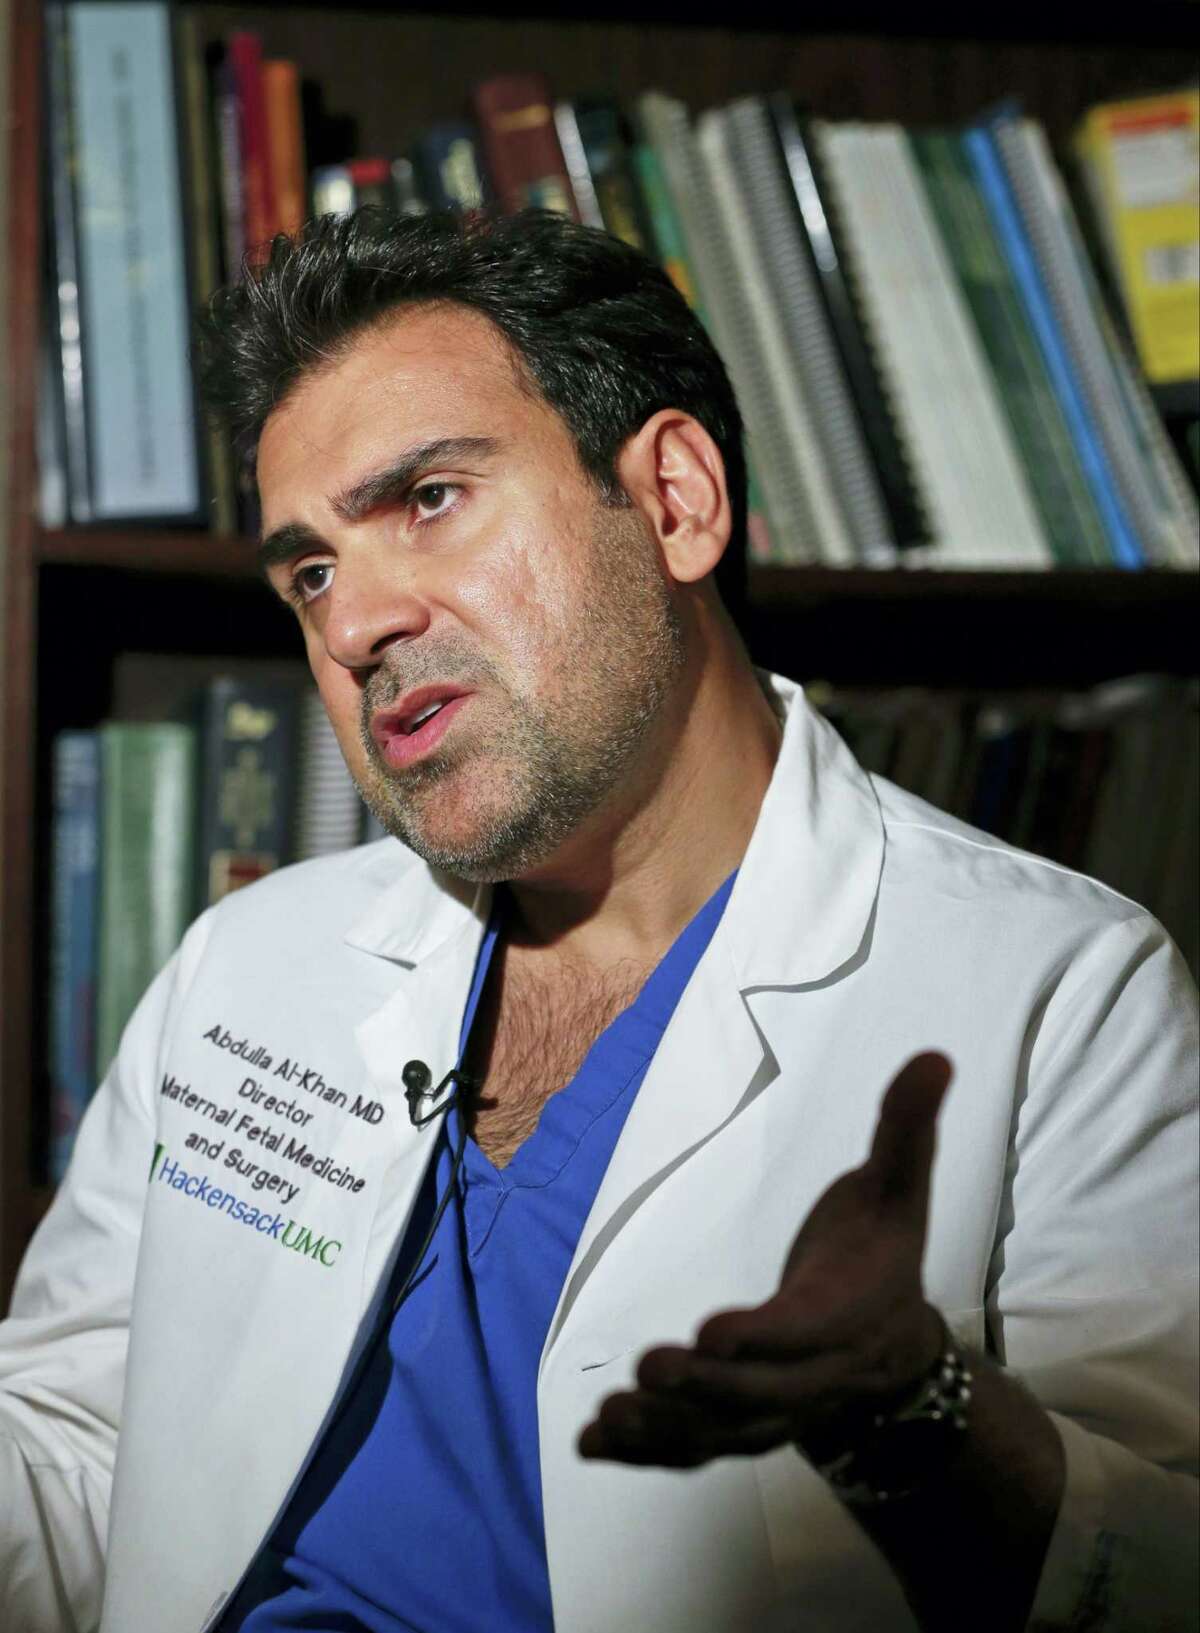 Dr. Abdulla Al-Khan, director of the Center for Abnormal Placentation, and section chief of Maternal Fetal Medicine and Surgery speaks during a news interview at Hackensack University Medical Center, Wednesday, June 1, 2016, in Hackensack, N.J. Doctors say a baby born to a mother with the Zika virus appears to be affected by the disease. Officials at Hackensack University Medical Center say the 31-year-old woman from Honduras delivered the baby girl through a cesarean section on Tuesday.